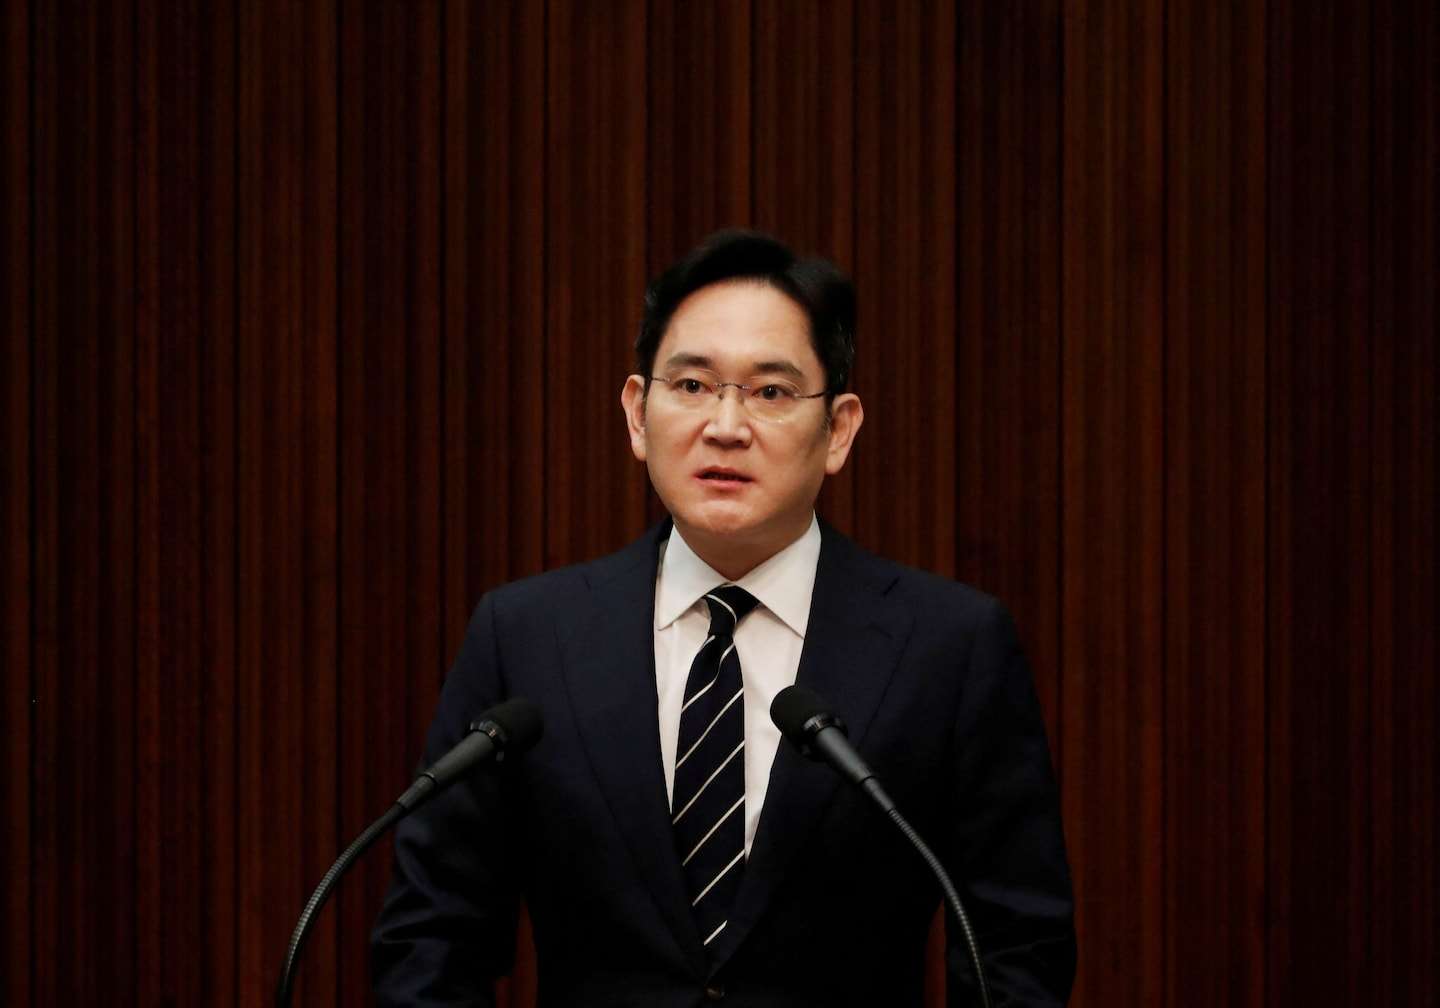 Samsung appoints former convict and heir Lee Jae-yong as chairman